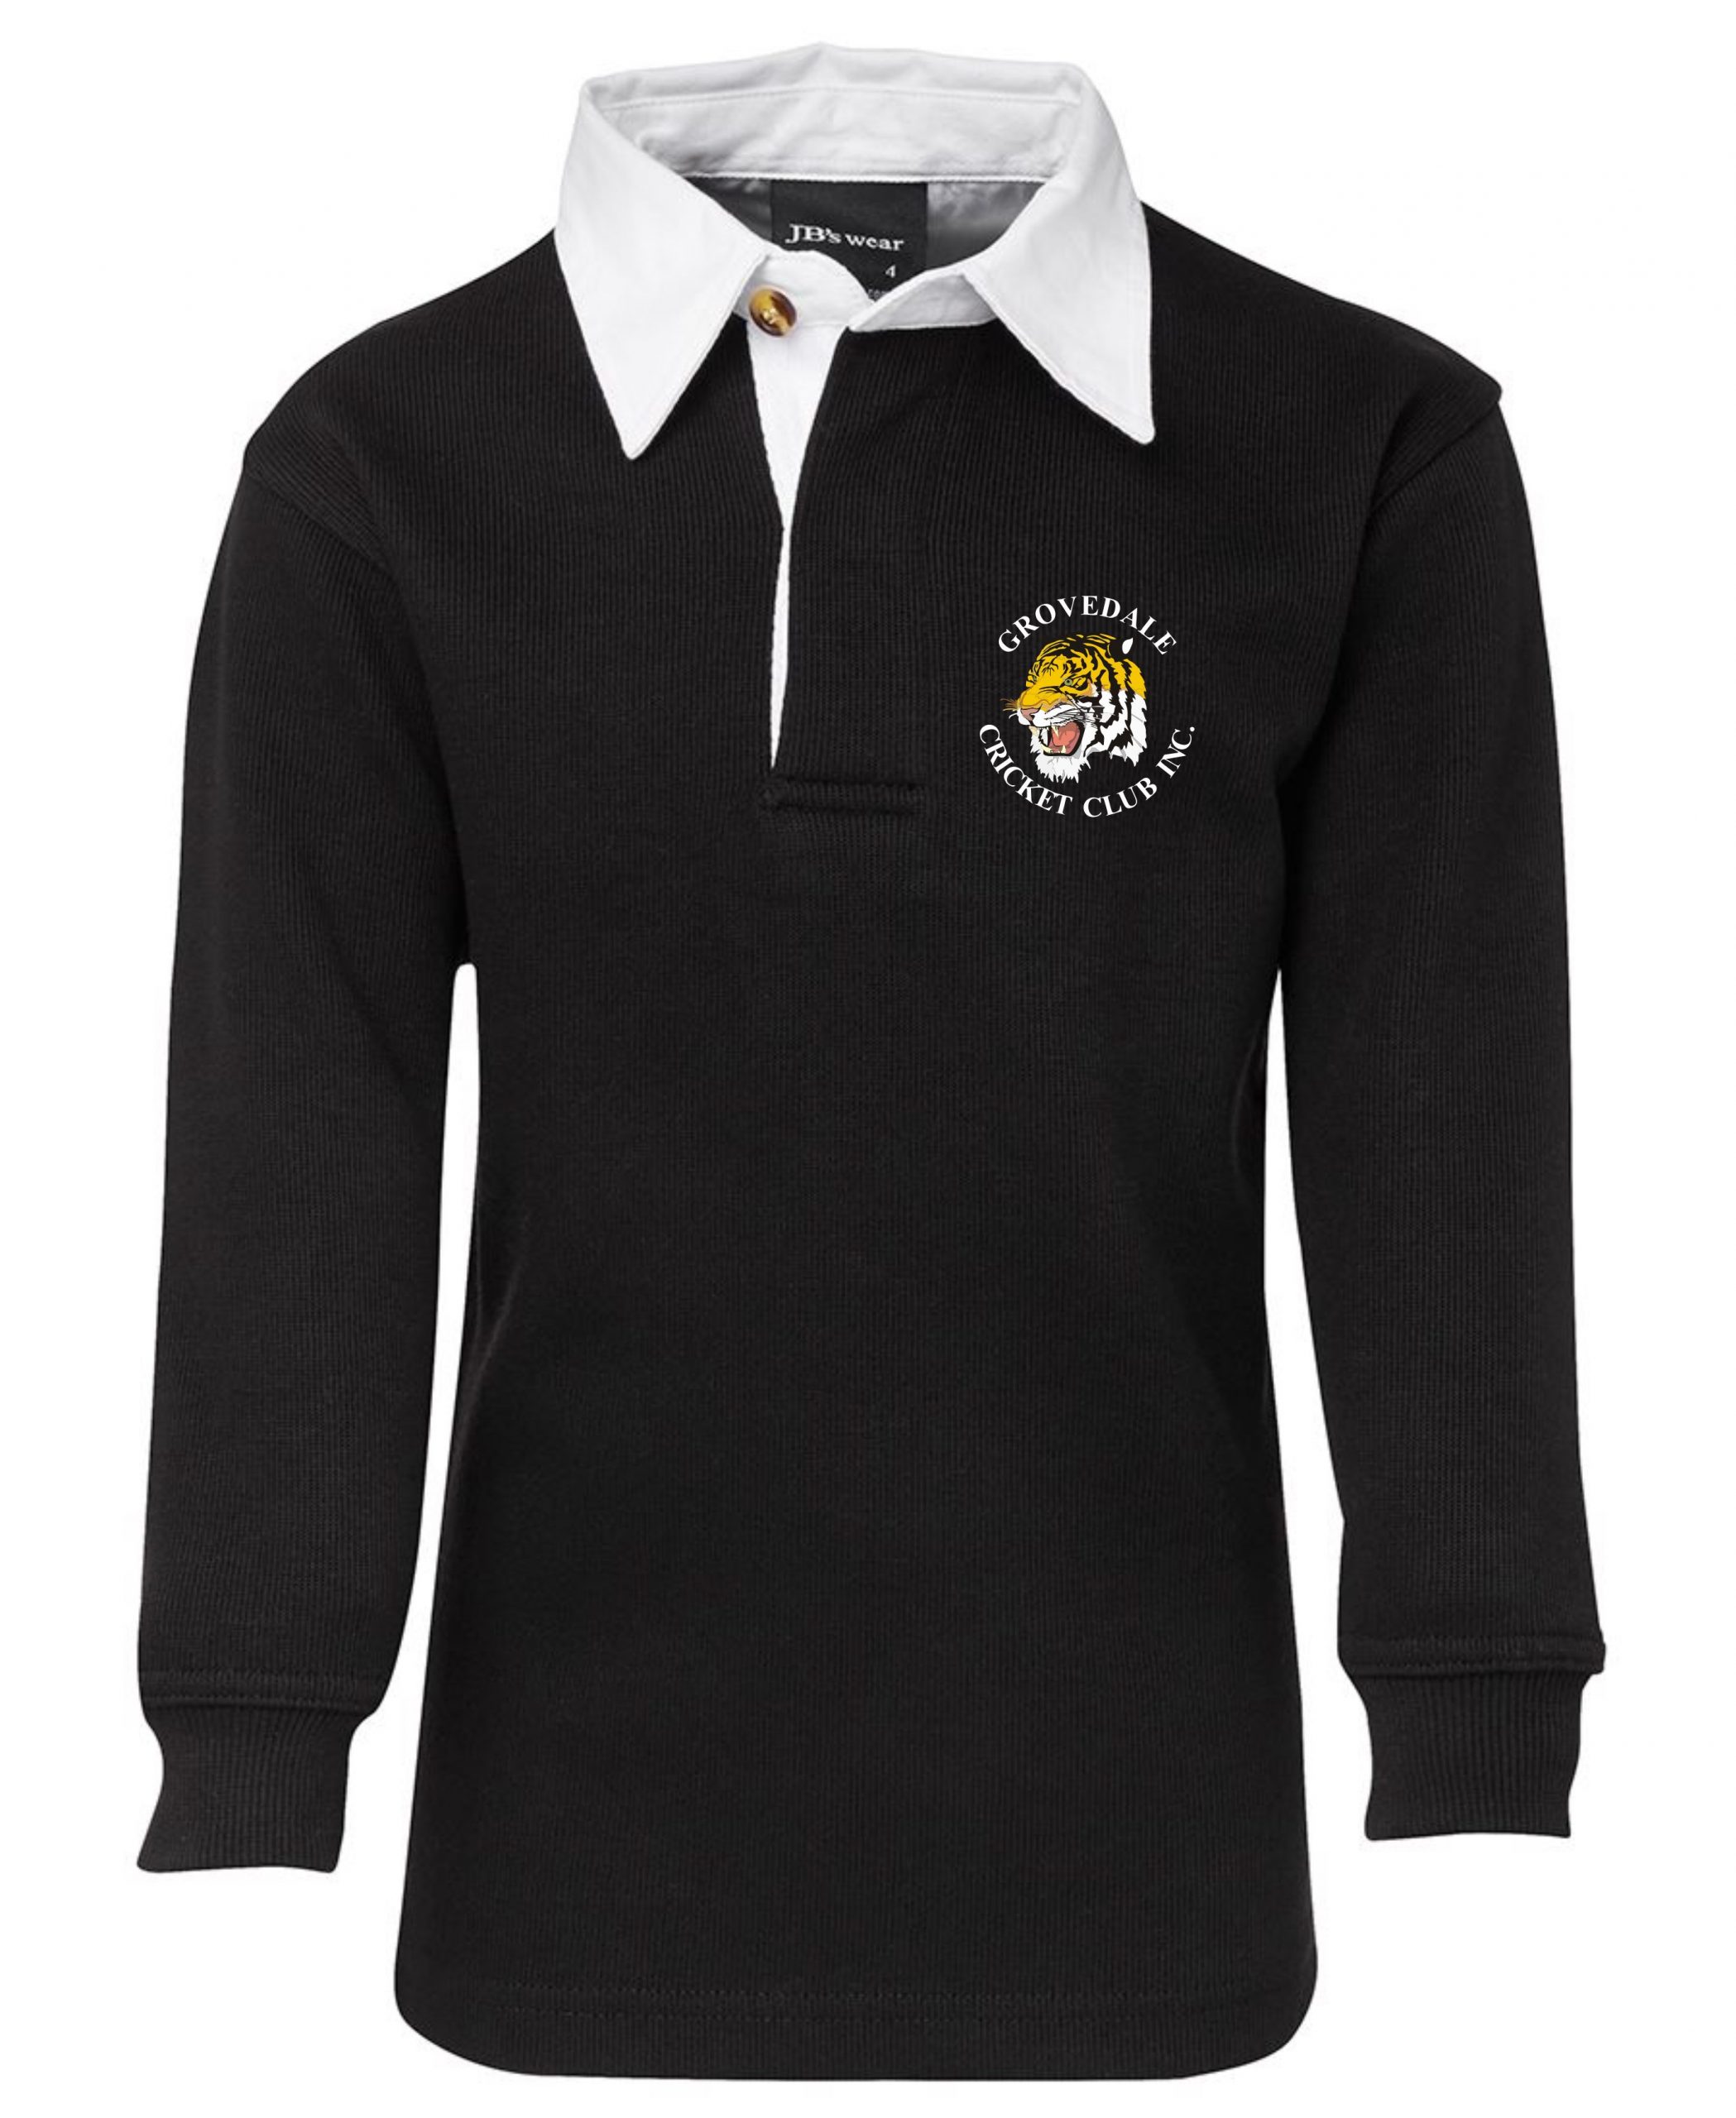 Kids Rugby Top in Black/White